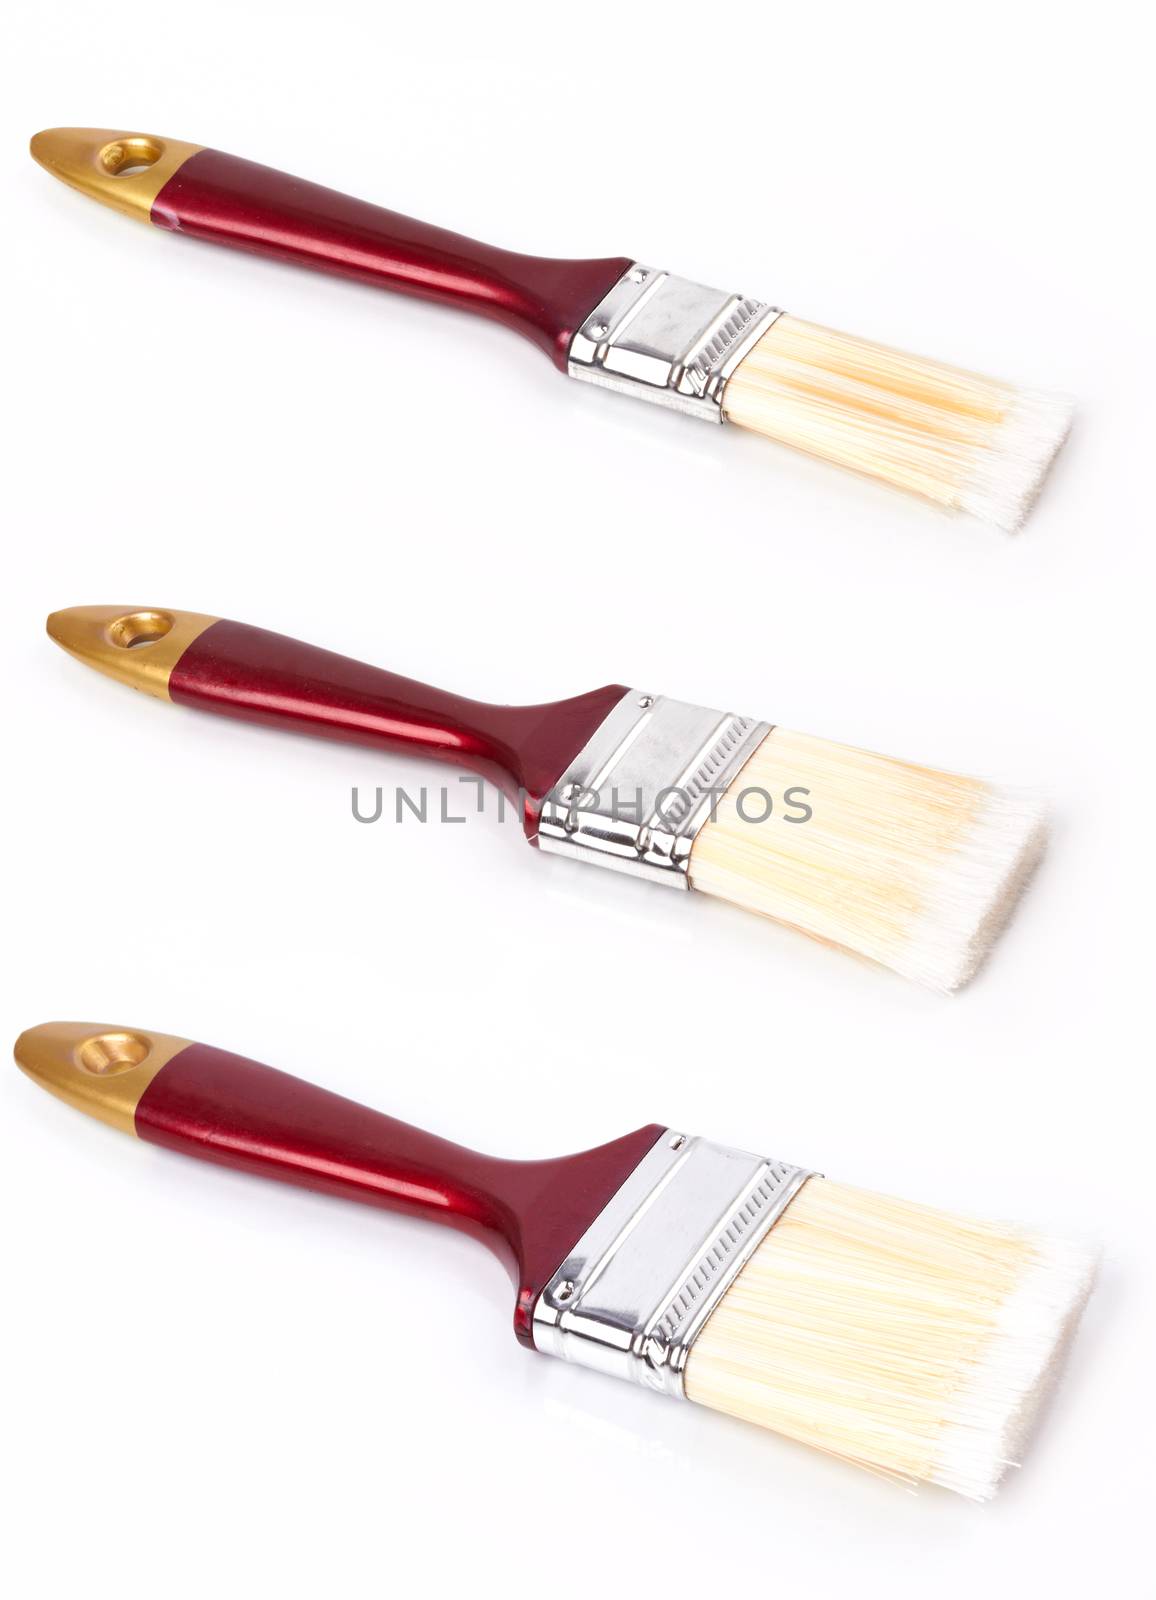 paint brushes by pioneer111